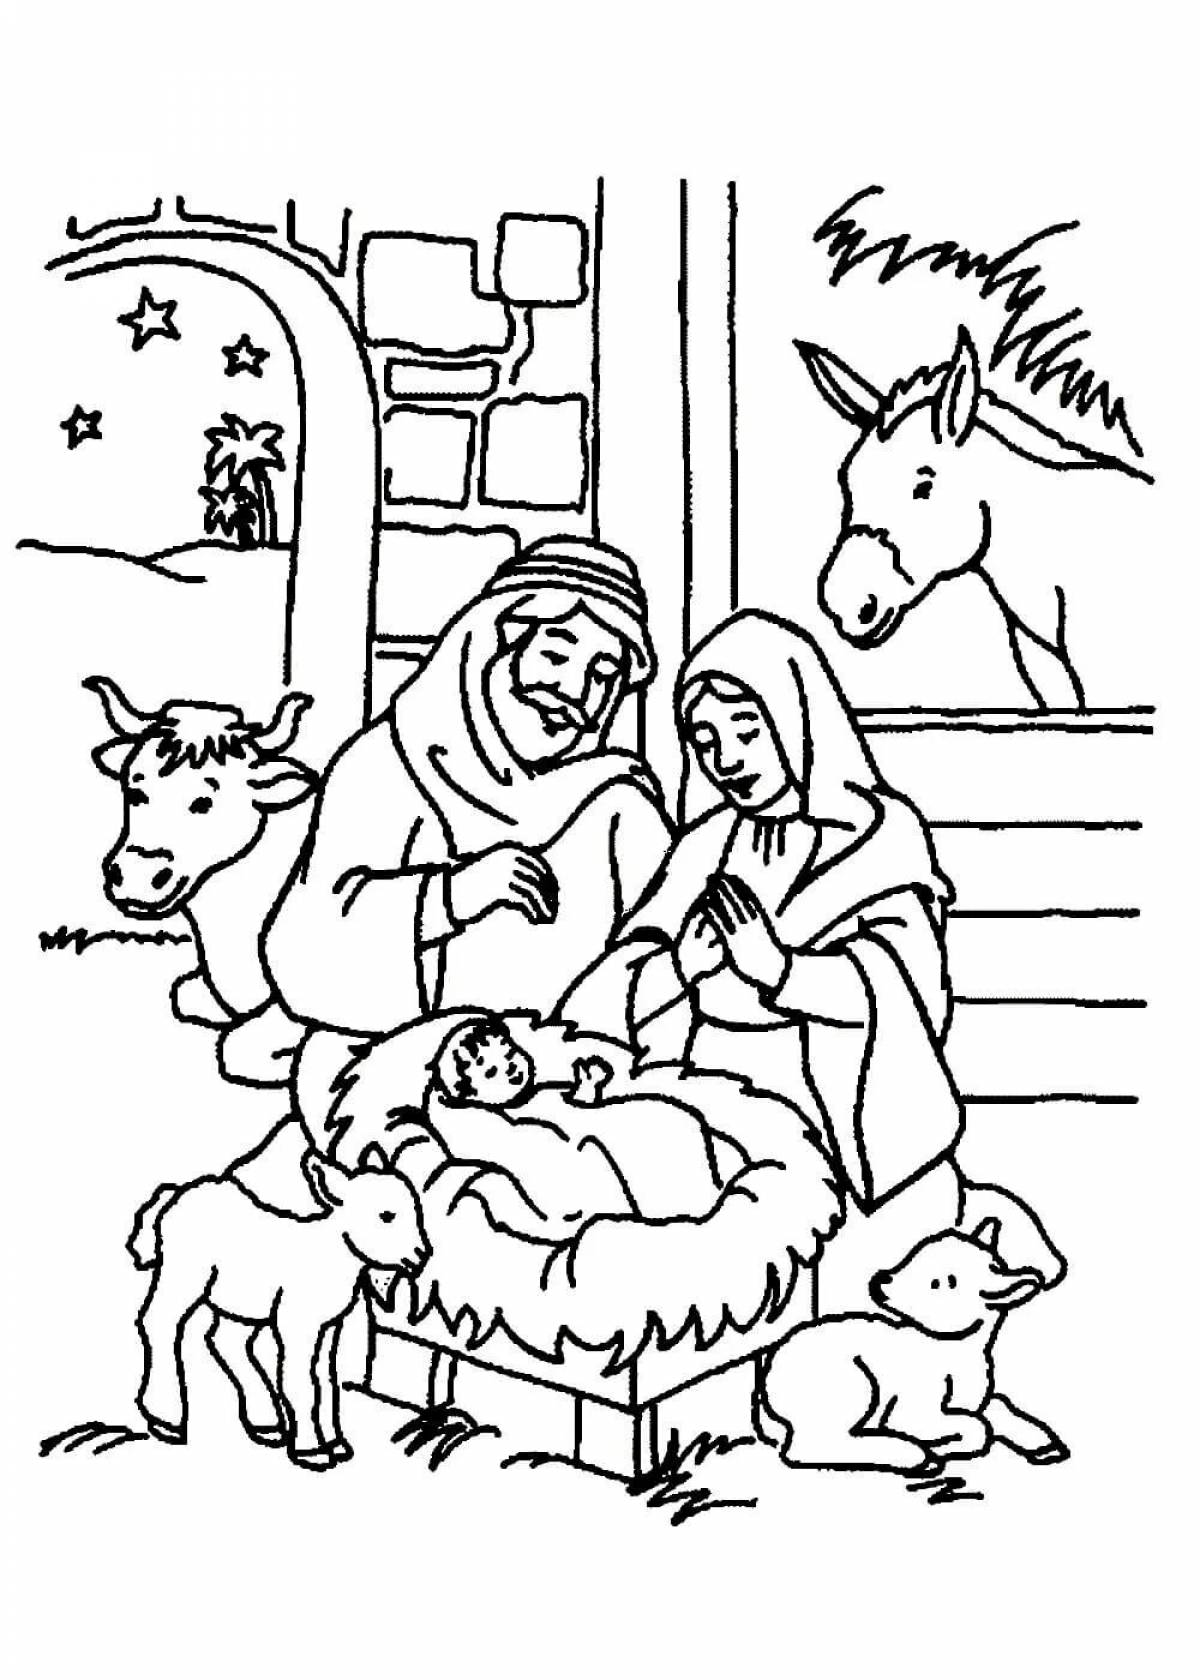 Exciting Christmas Eve coloring book